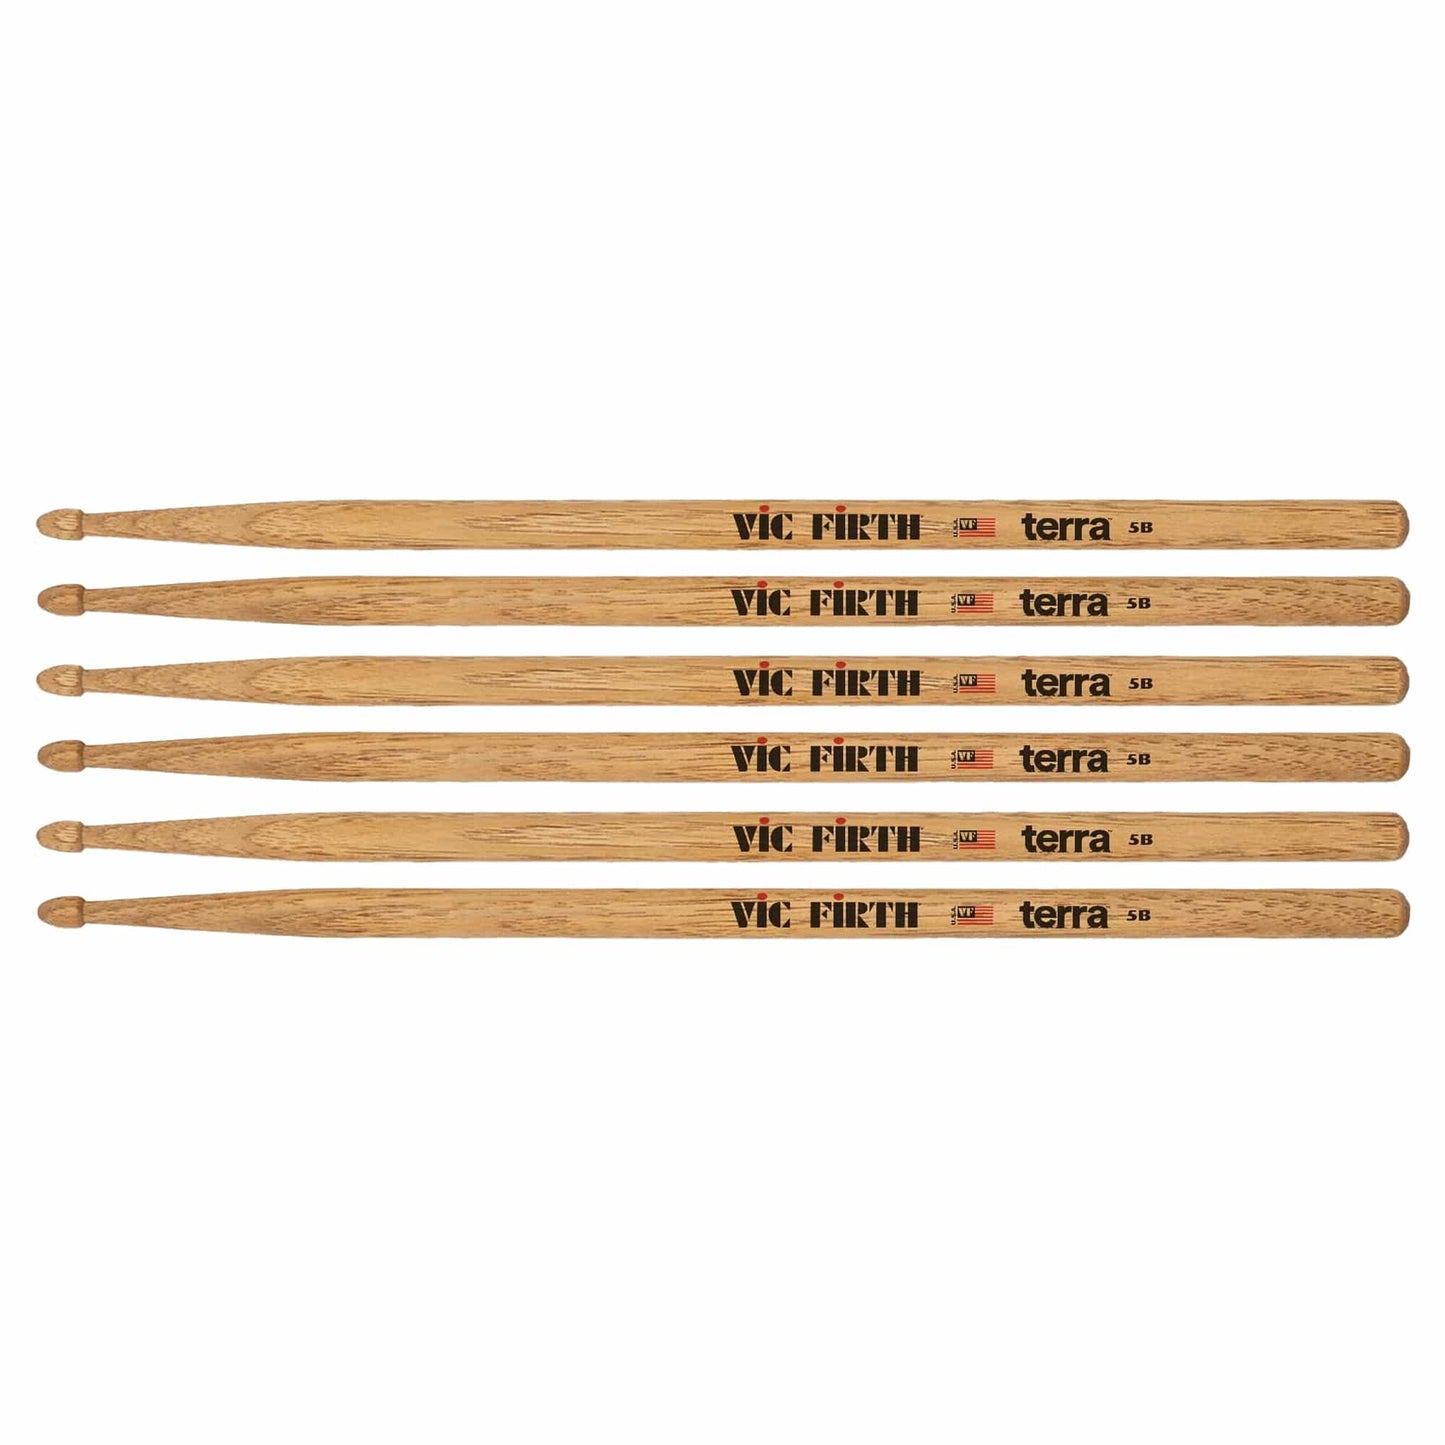 Vic Firth American Classic 5BT Terra Wood Tip Drum Sticks 3-Pack Bundle Drums and Percussion / Parts and Accessories / Drum Sticks and Mallets